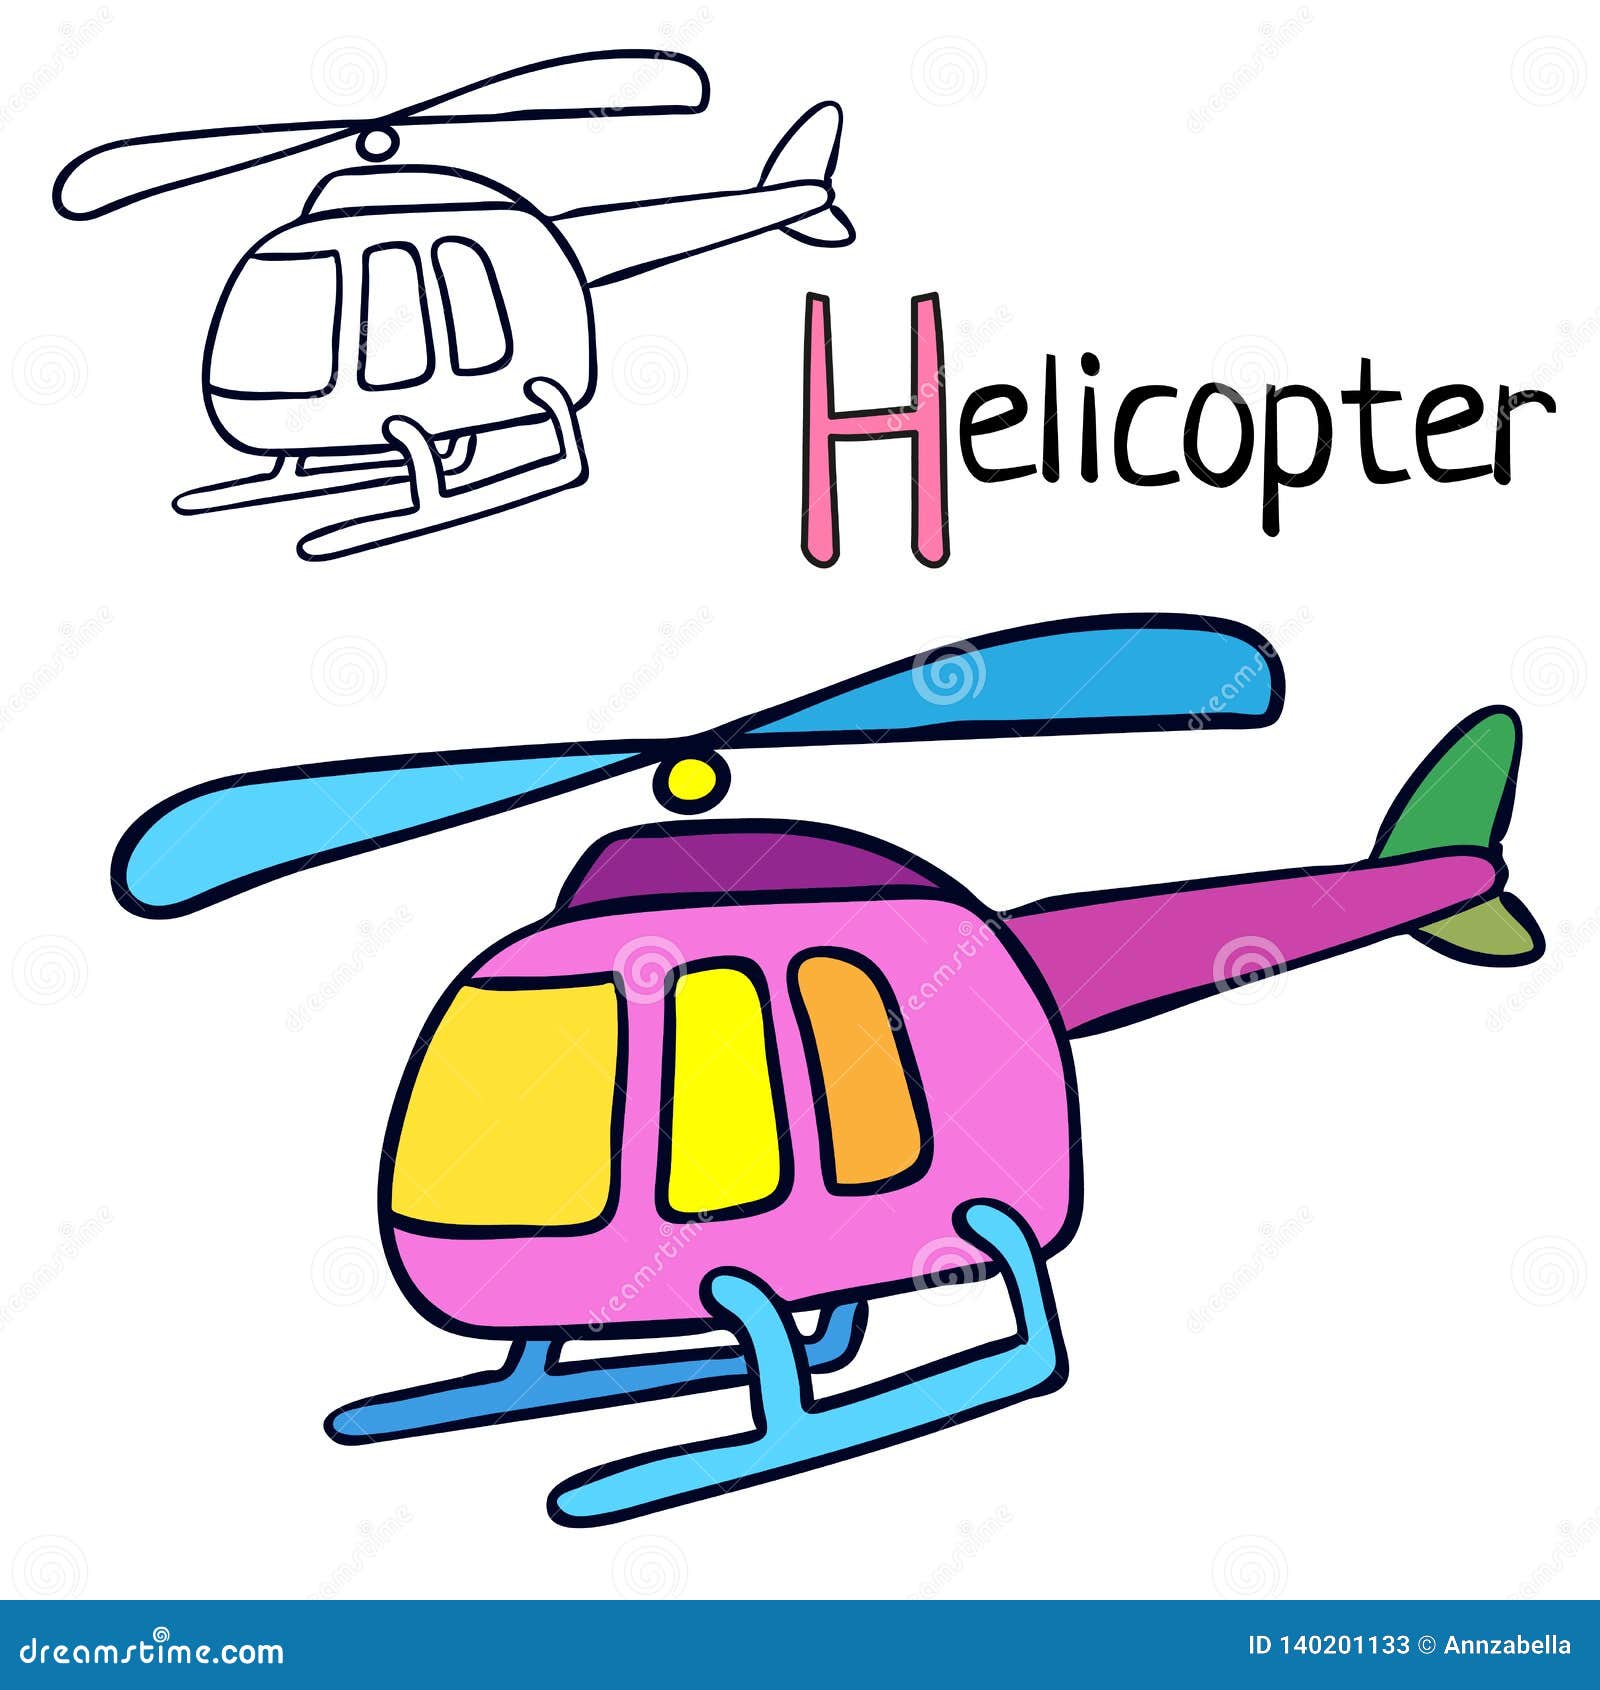 Helicopter. Coloring Book Page Stock Vector   Illustration of ...